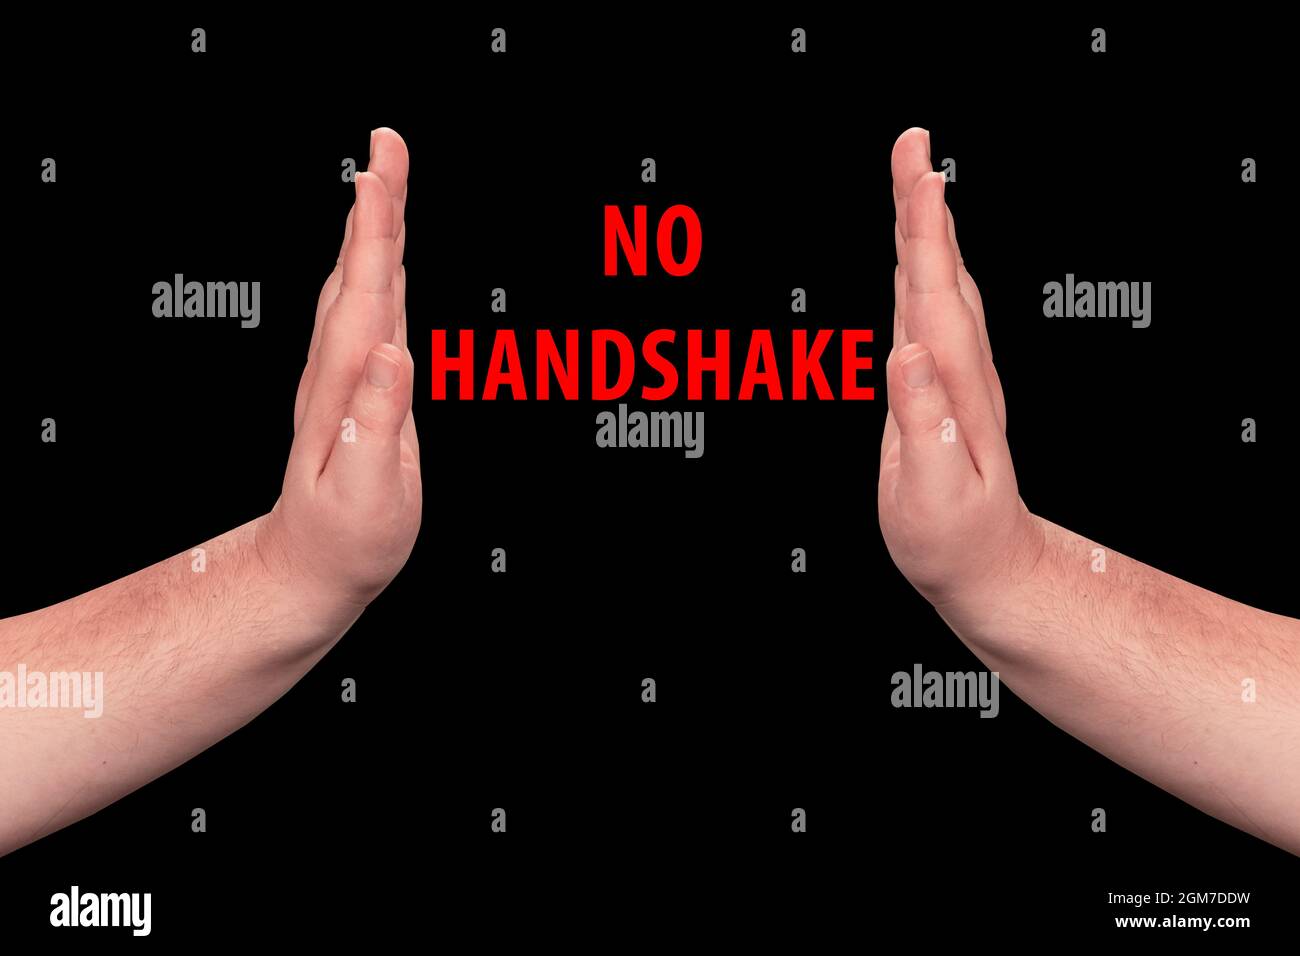 no handshake concept or two man hands giving high five isolated. copy space. black background. Stock Photo